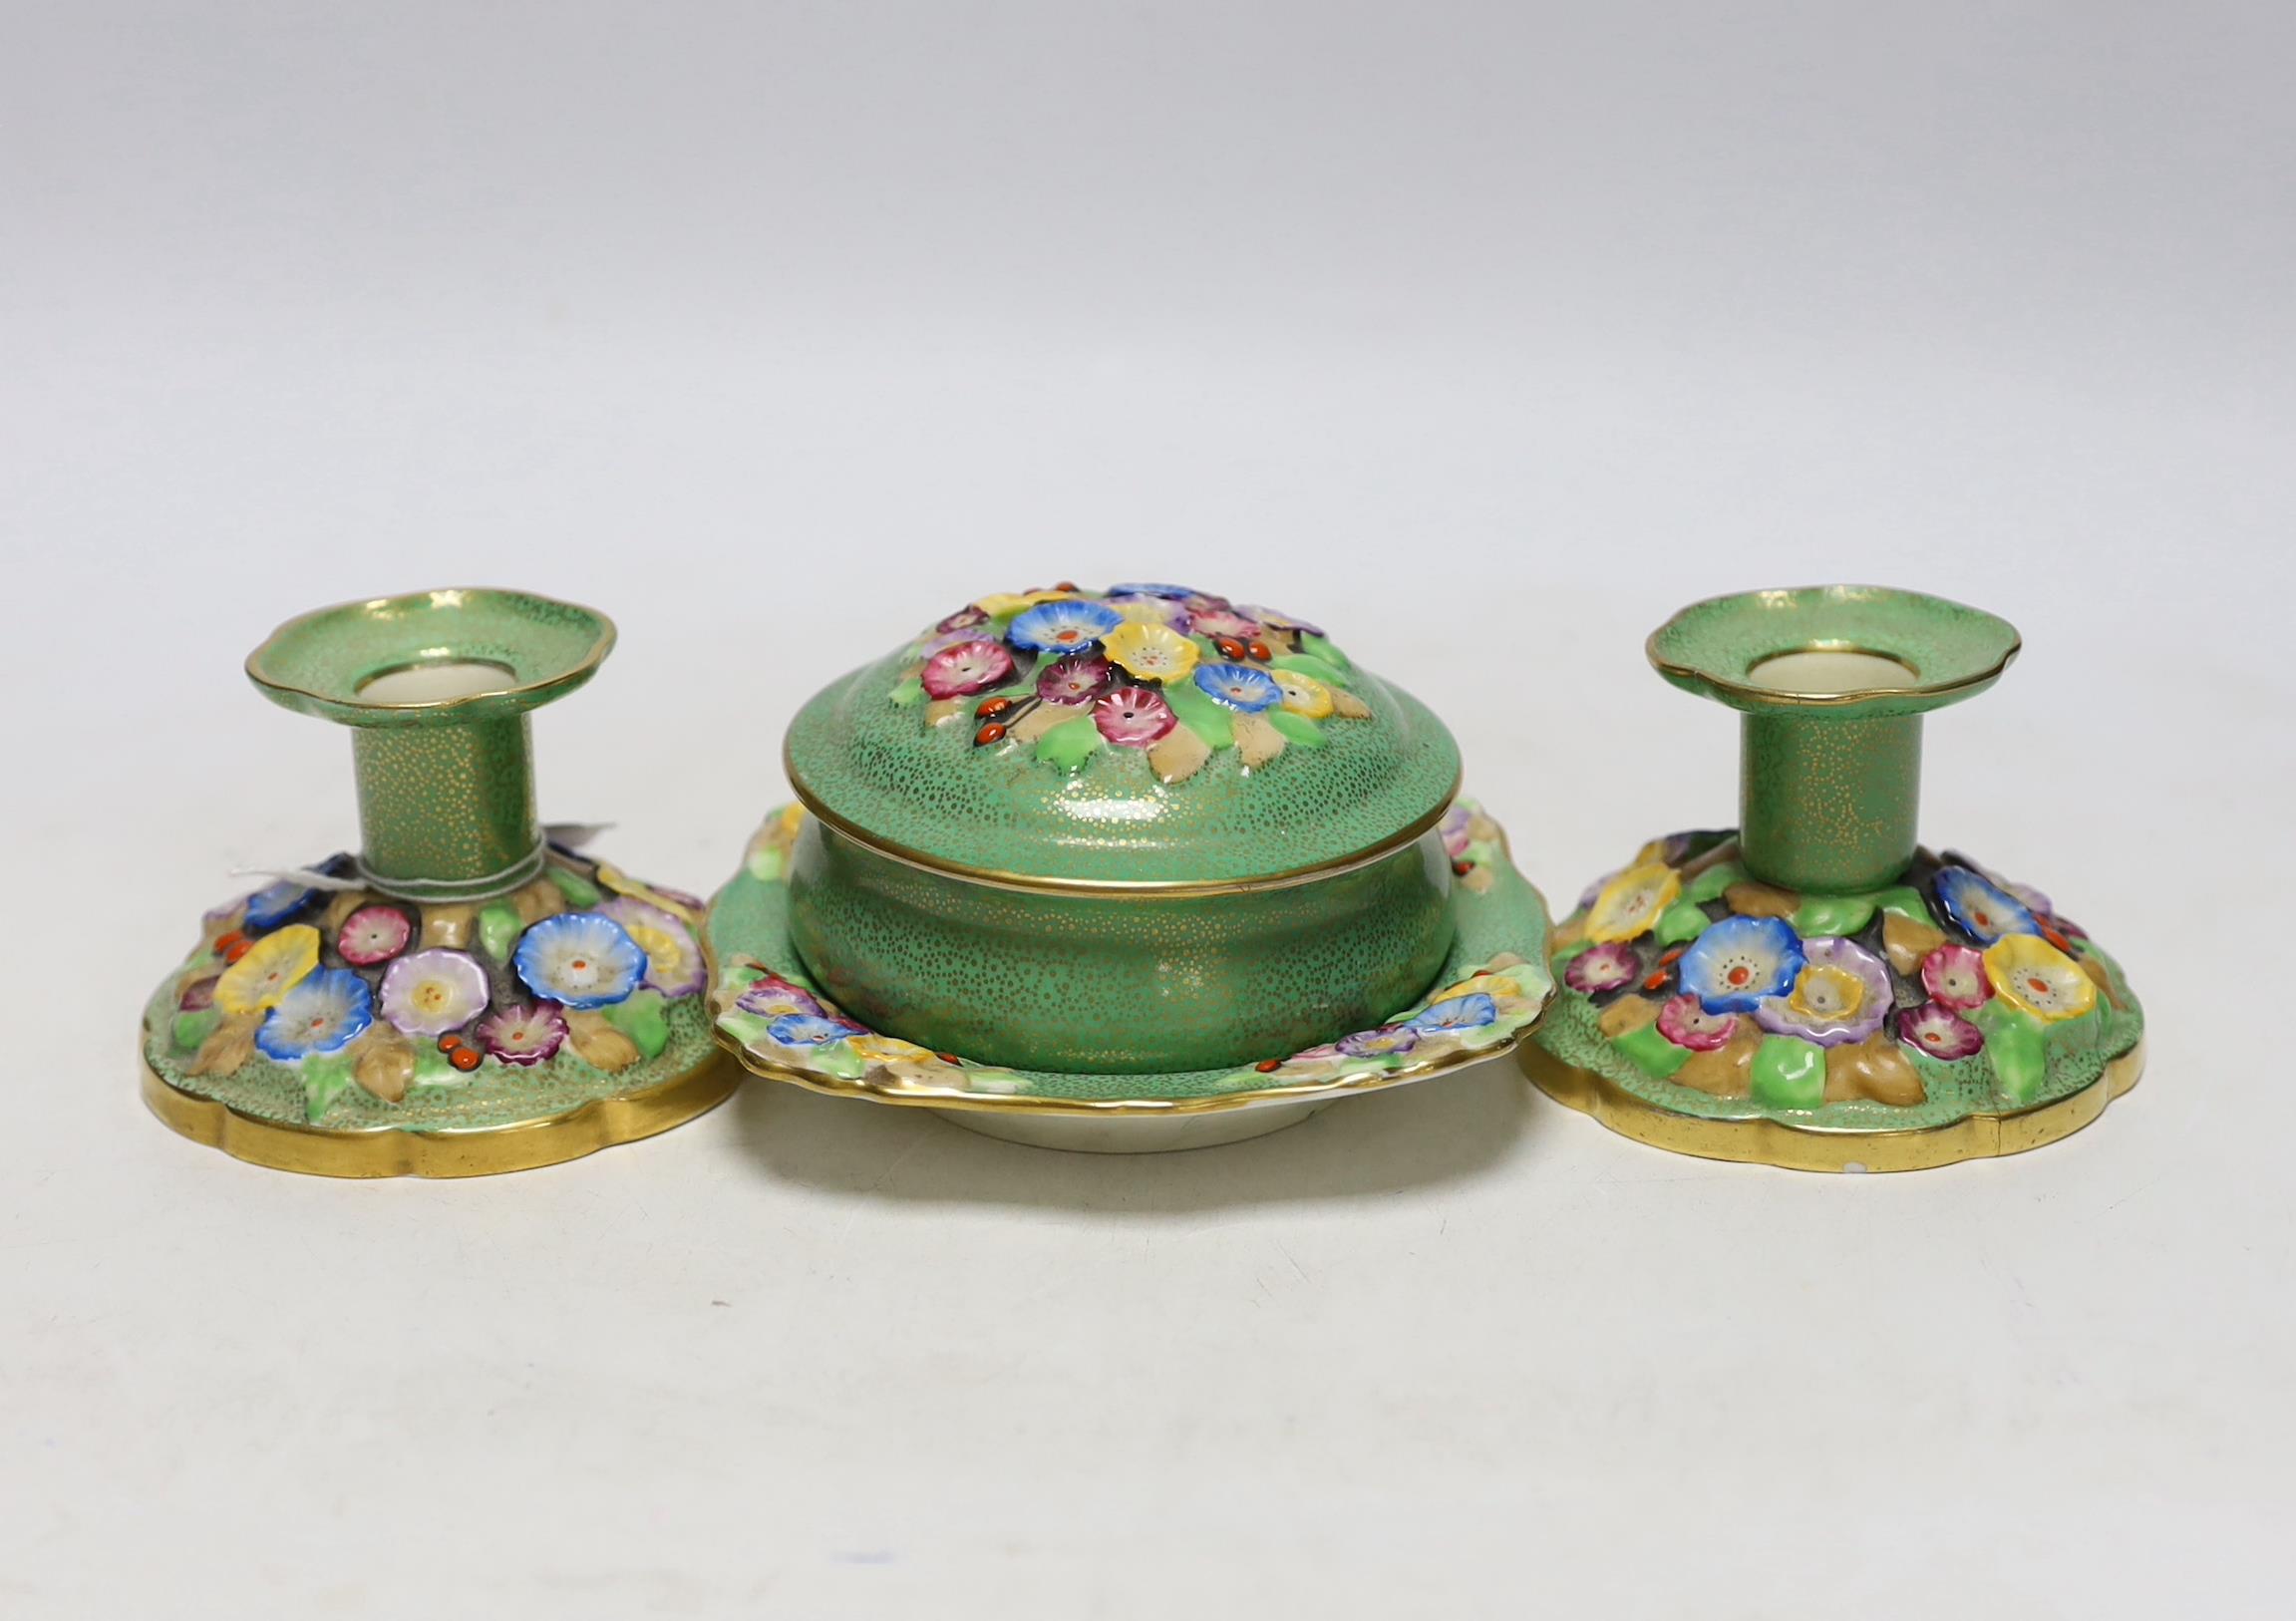 A pair of Tuscan china "Plant" pattern floral encrusted dwarf candlesticks, a circular lidded box